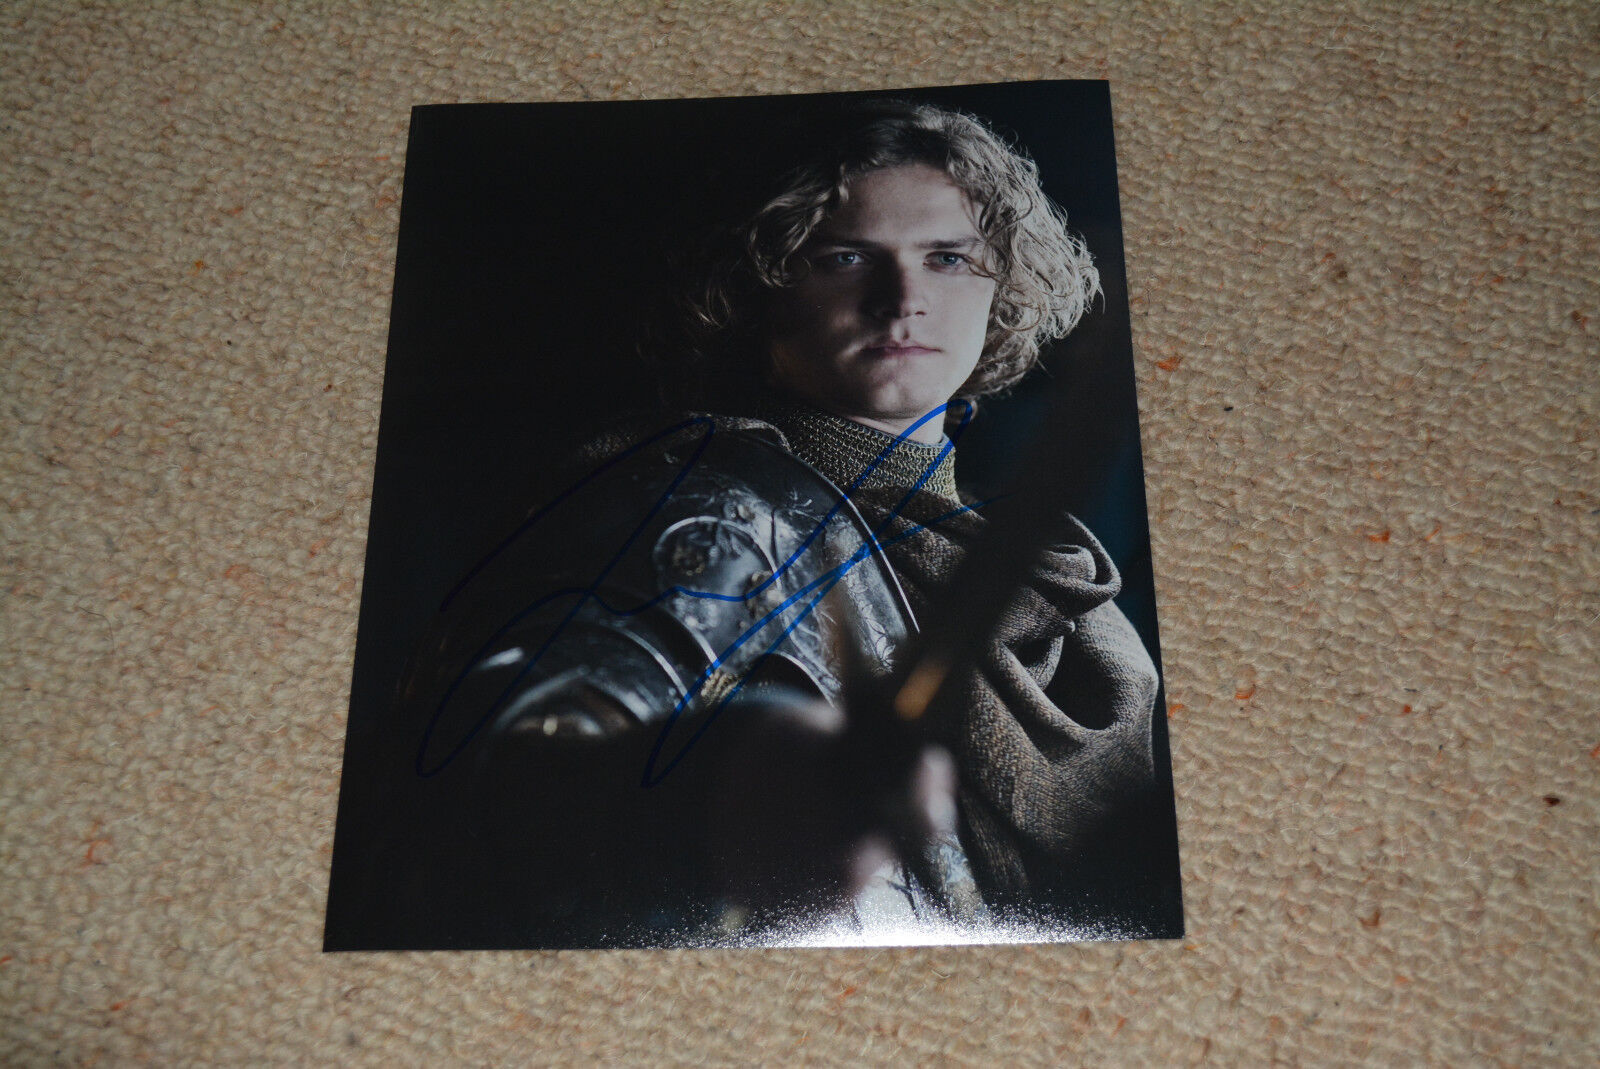 FINN JONES signed autograph In Person 8x10 (20x25 cm) GAME OF THRONES